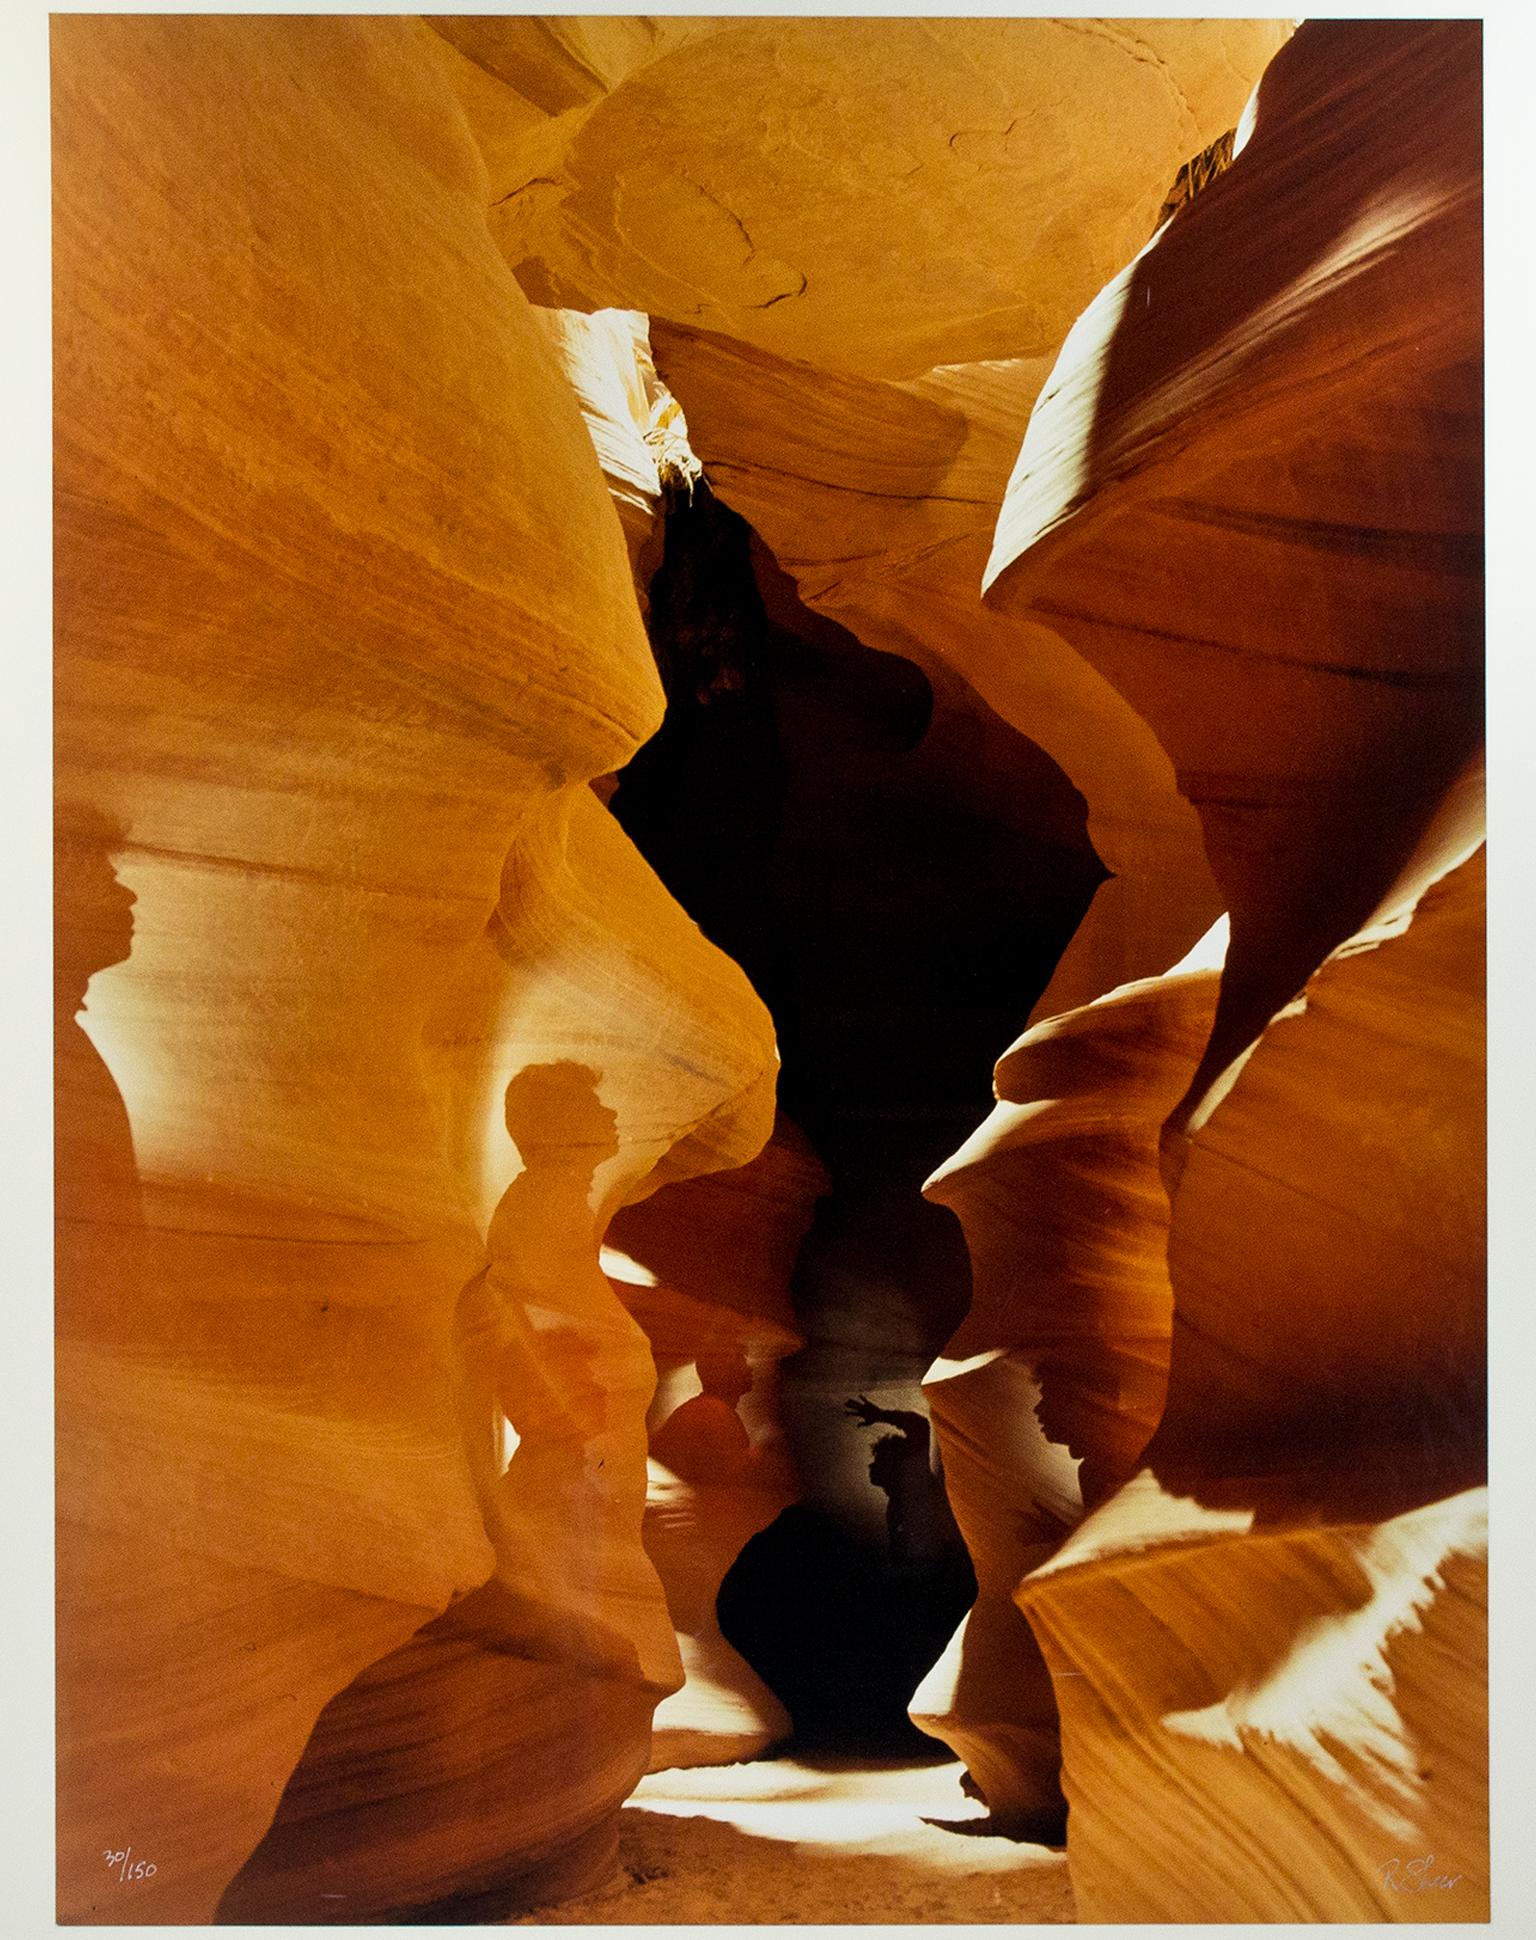 "Spirits in Corkscrew Canyon" is an original fine-art photograph by Robert Kawika Sheer. This piece is signed in the lower right and editioned in the lower left. Edition 30/150. Sheer depicts the aptly-named corkscrew canyon with twisting golden and